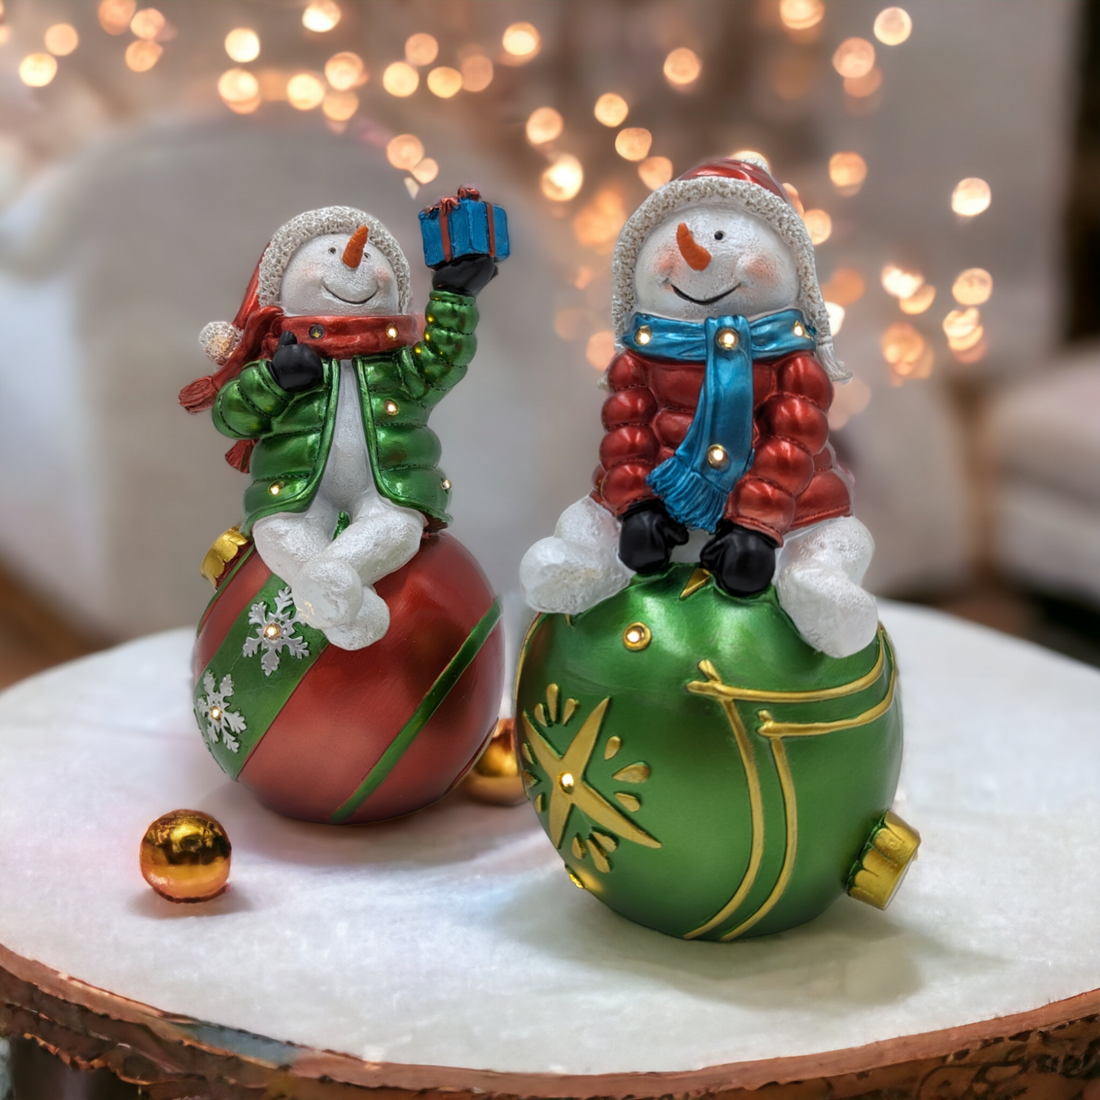 24cm Snowman on Bauble Decoration with LED Lights